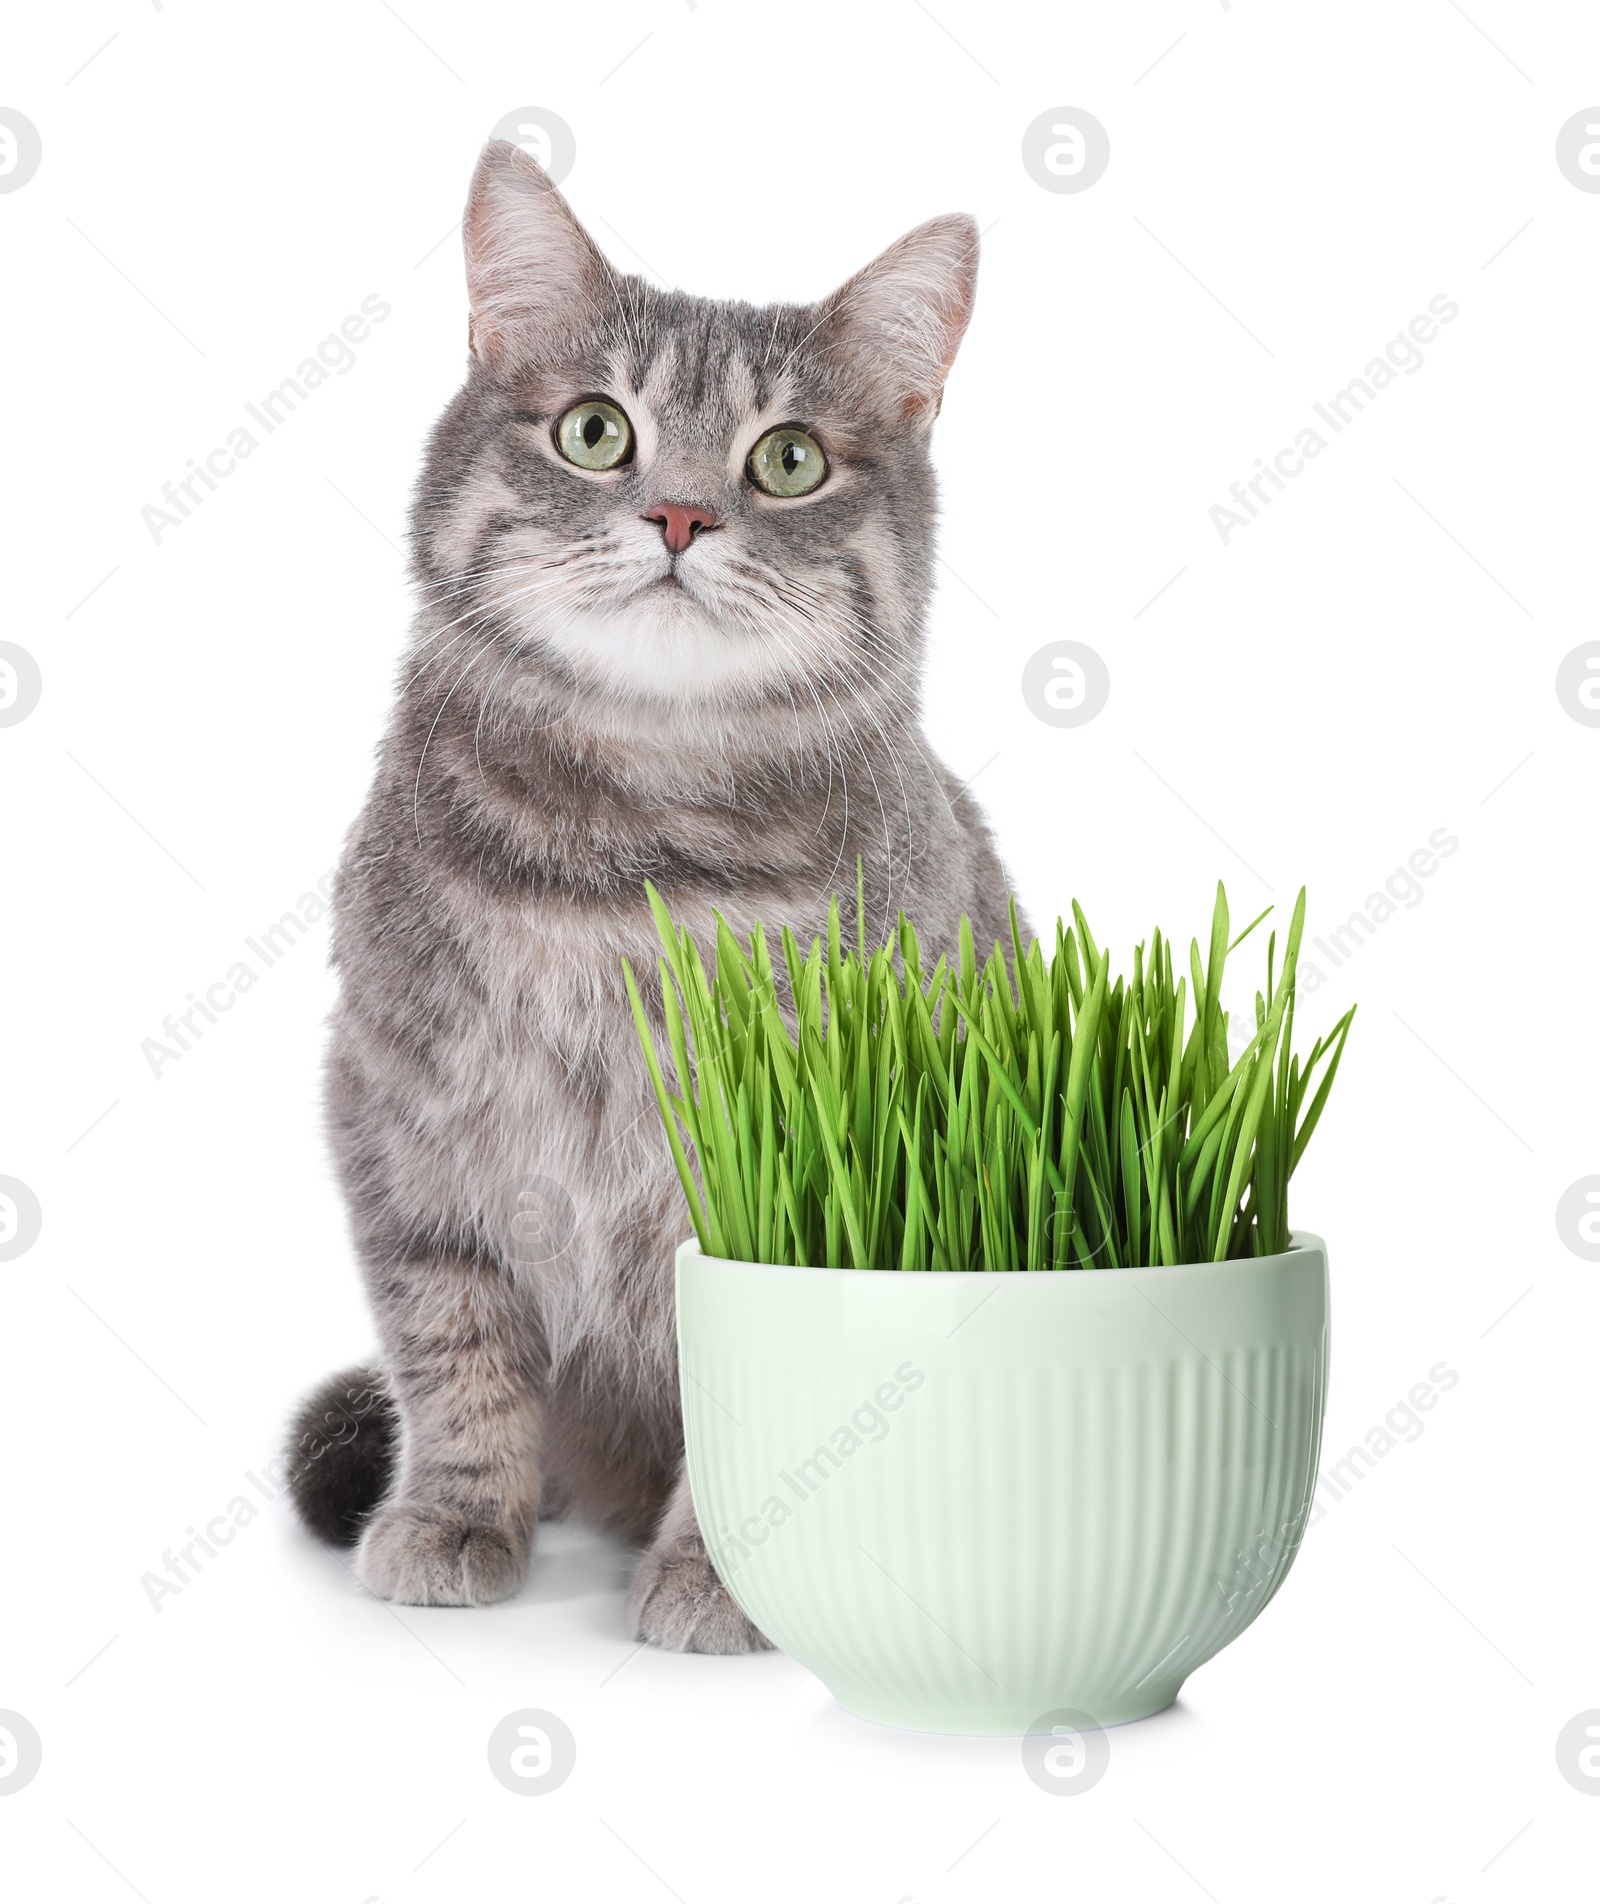 Image of Adorable cat and ceramic bowl with fresh green grass on white background